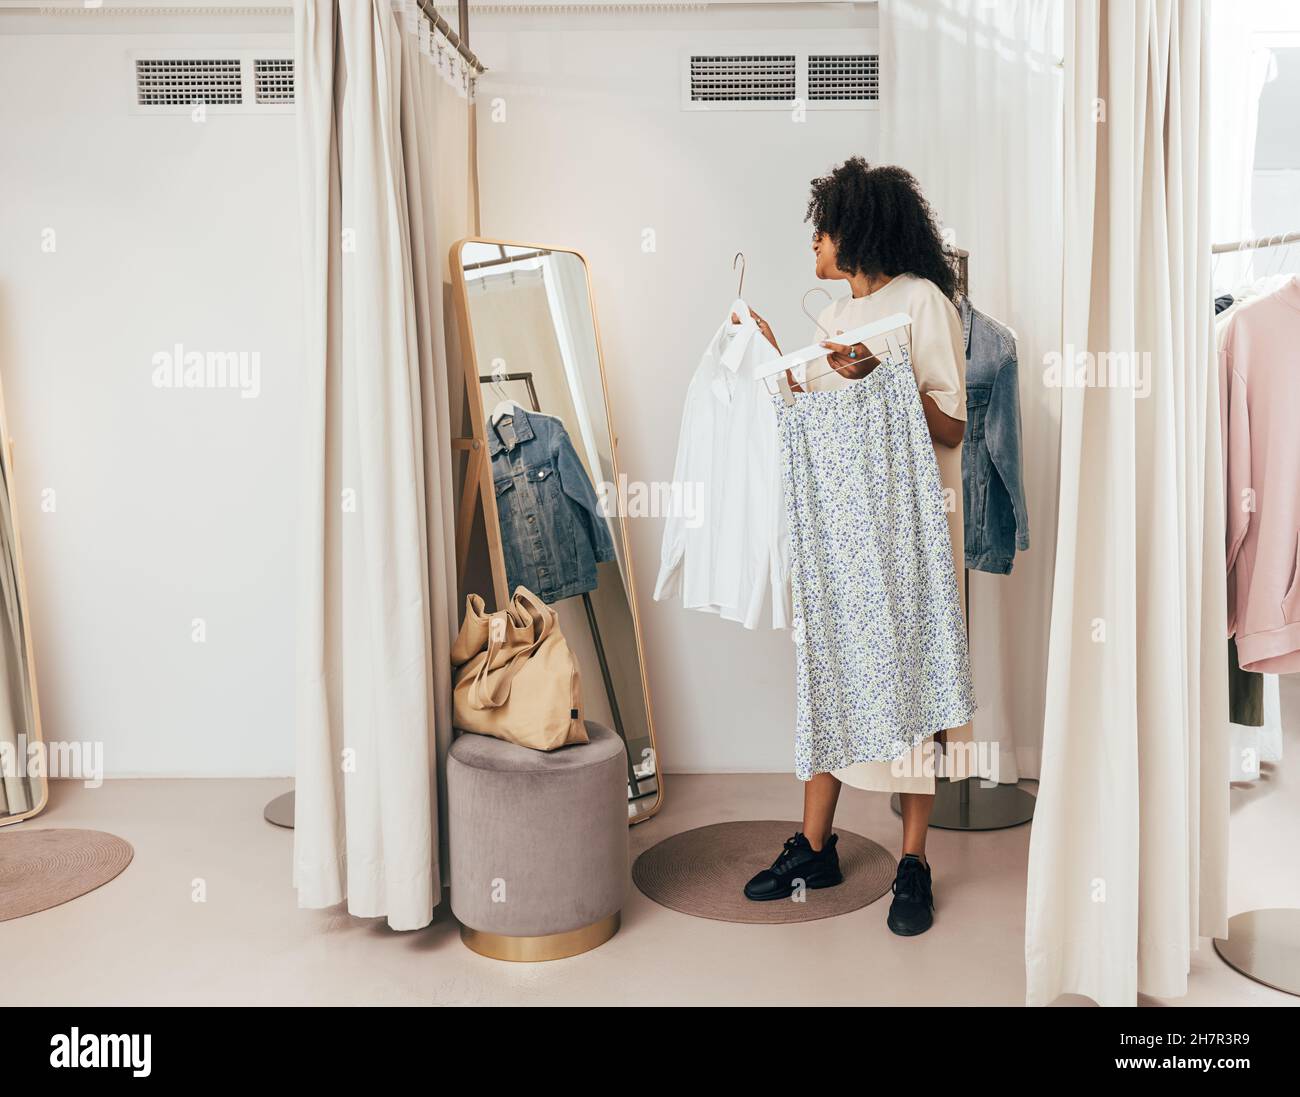 Young woman choosing clothes while standing in fitting room in a boutique Stock Photo